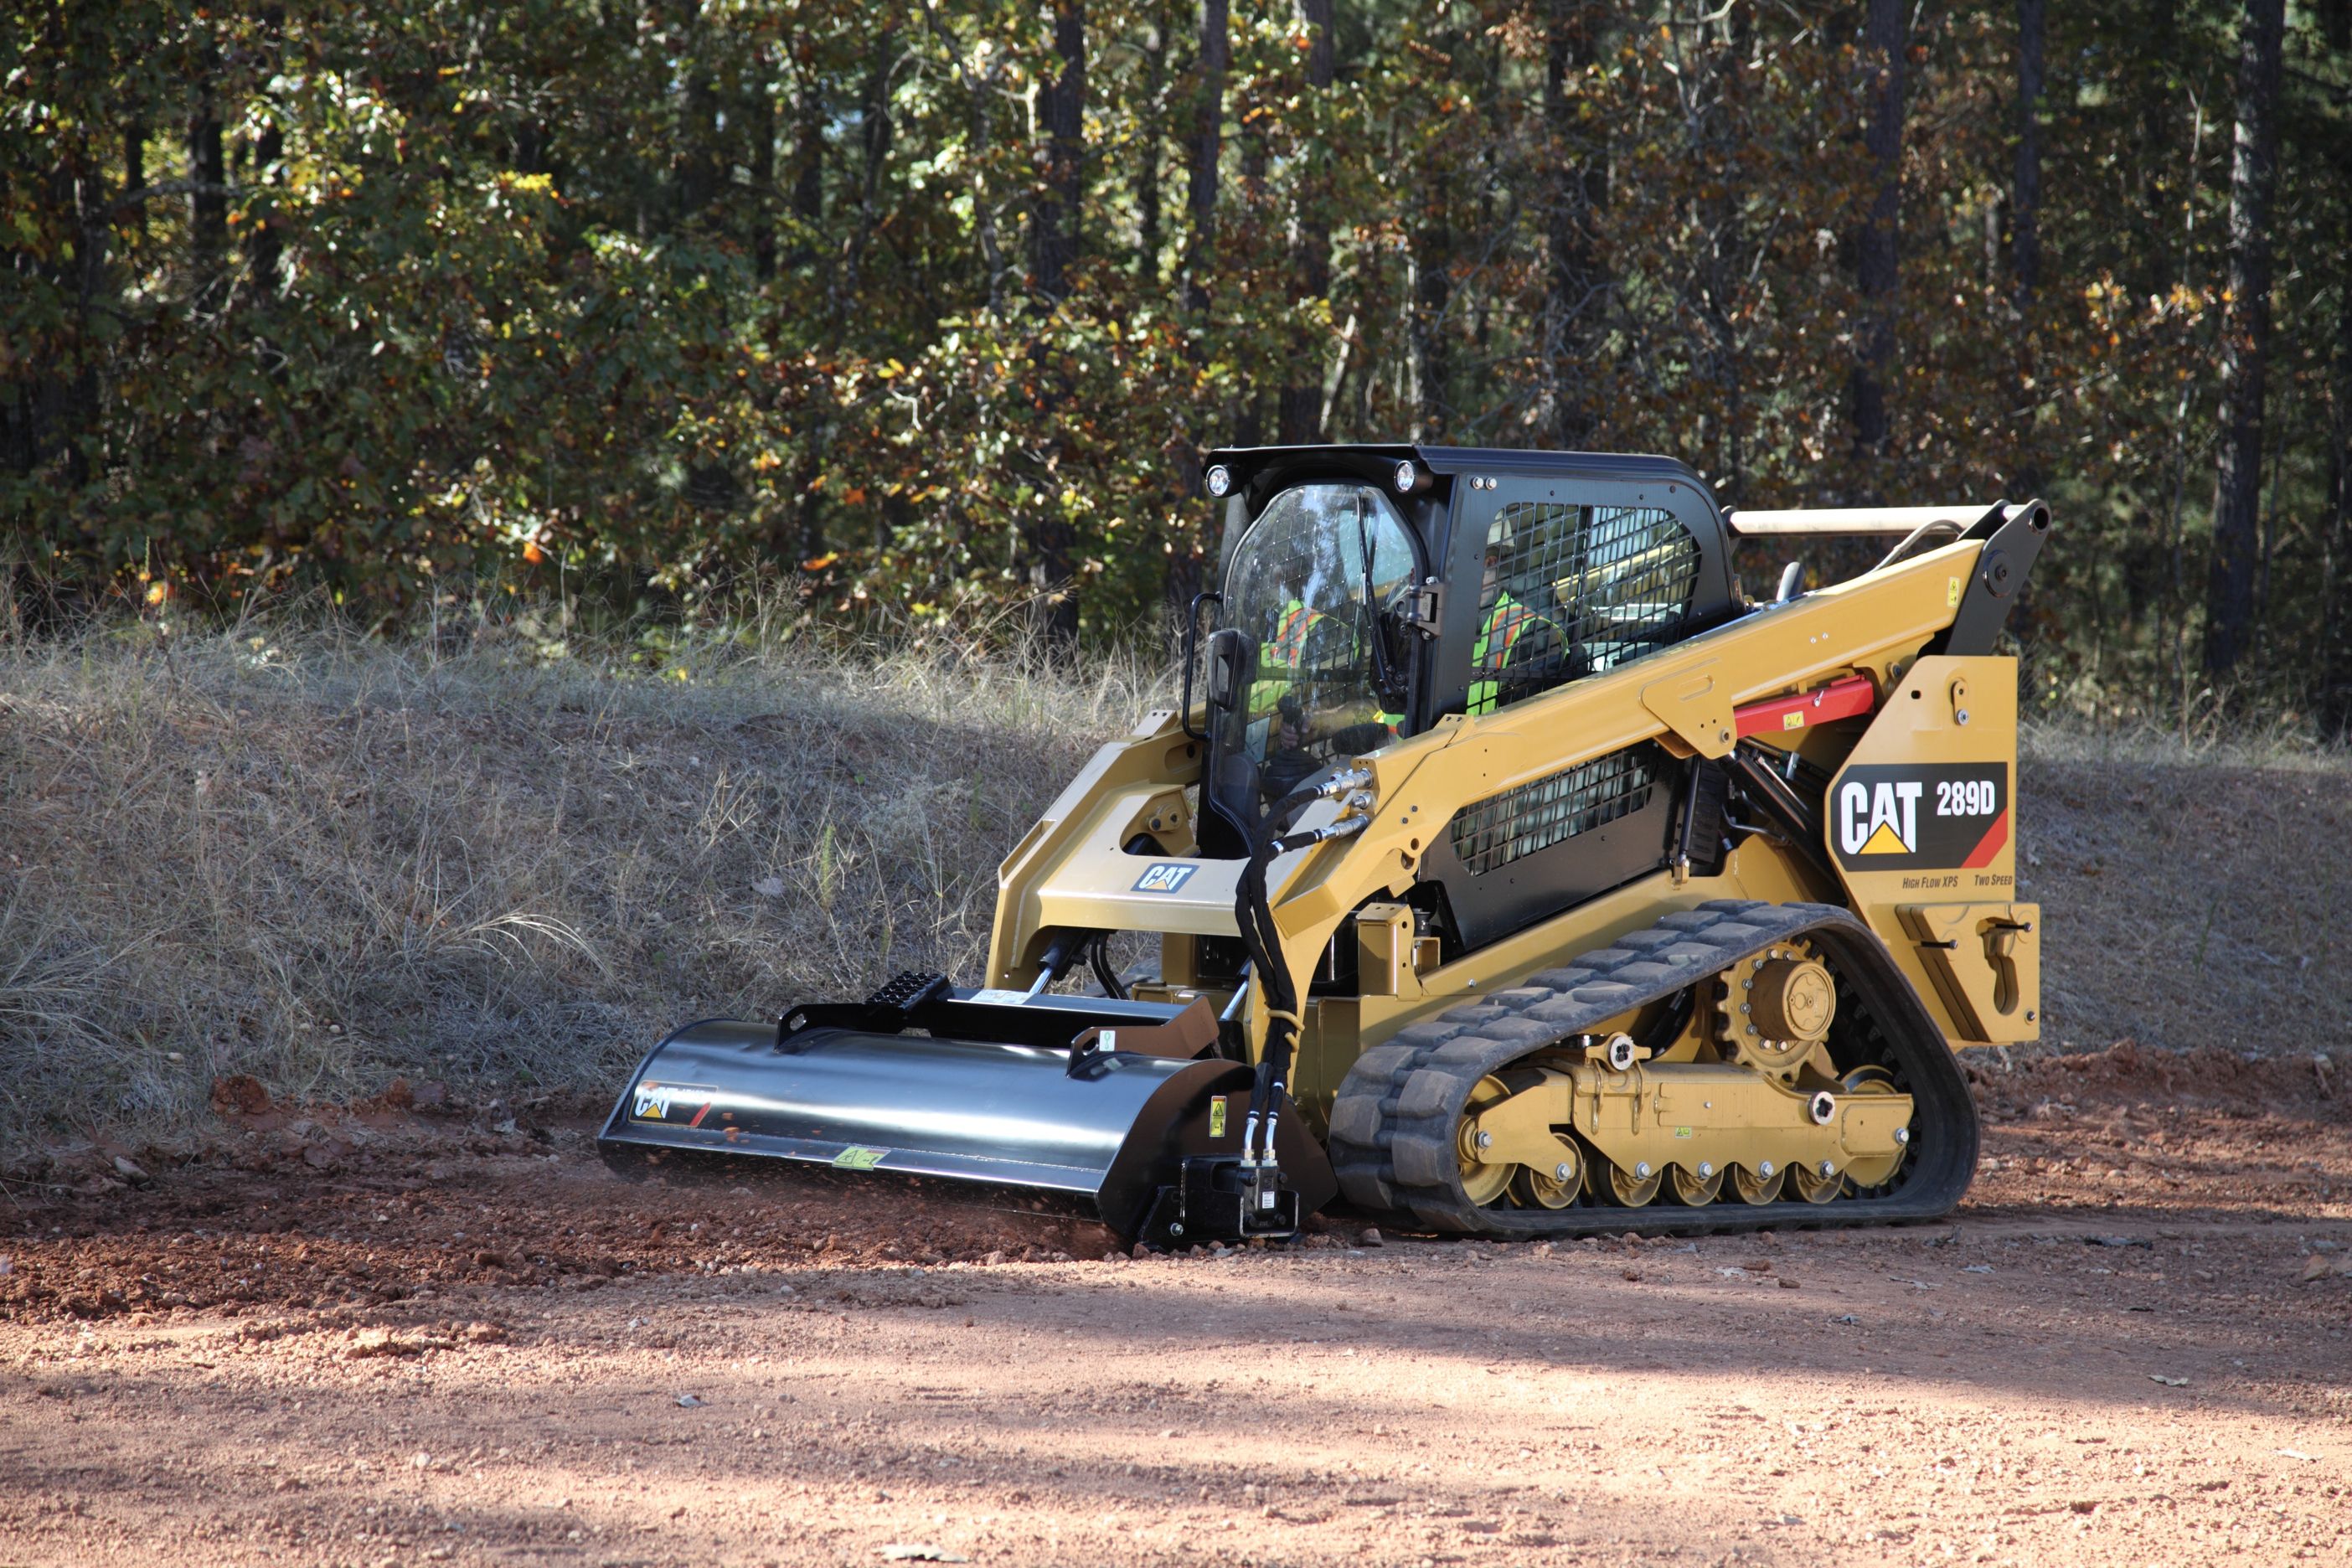 Turn to Cat Used for Your Landscaping Equipment Needs